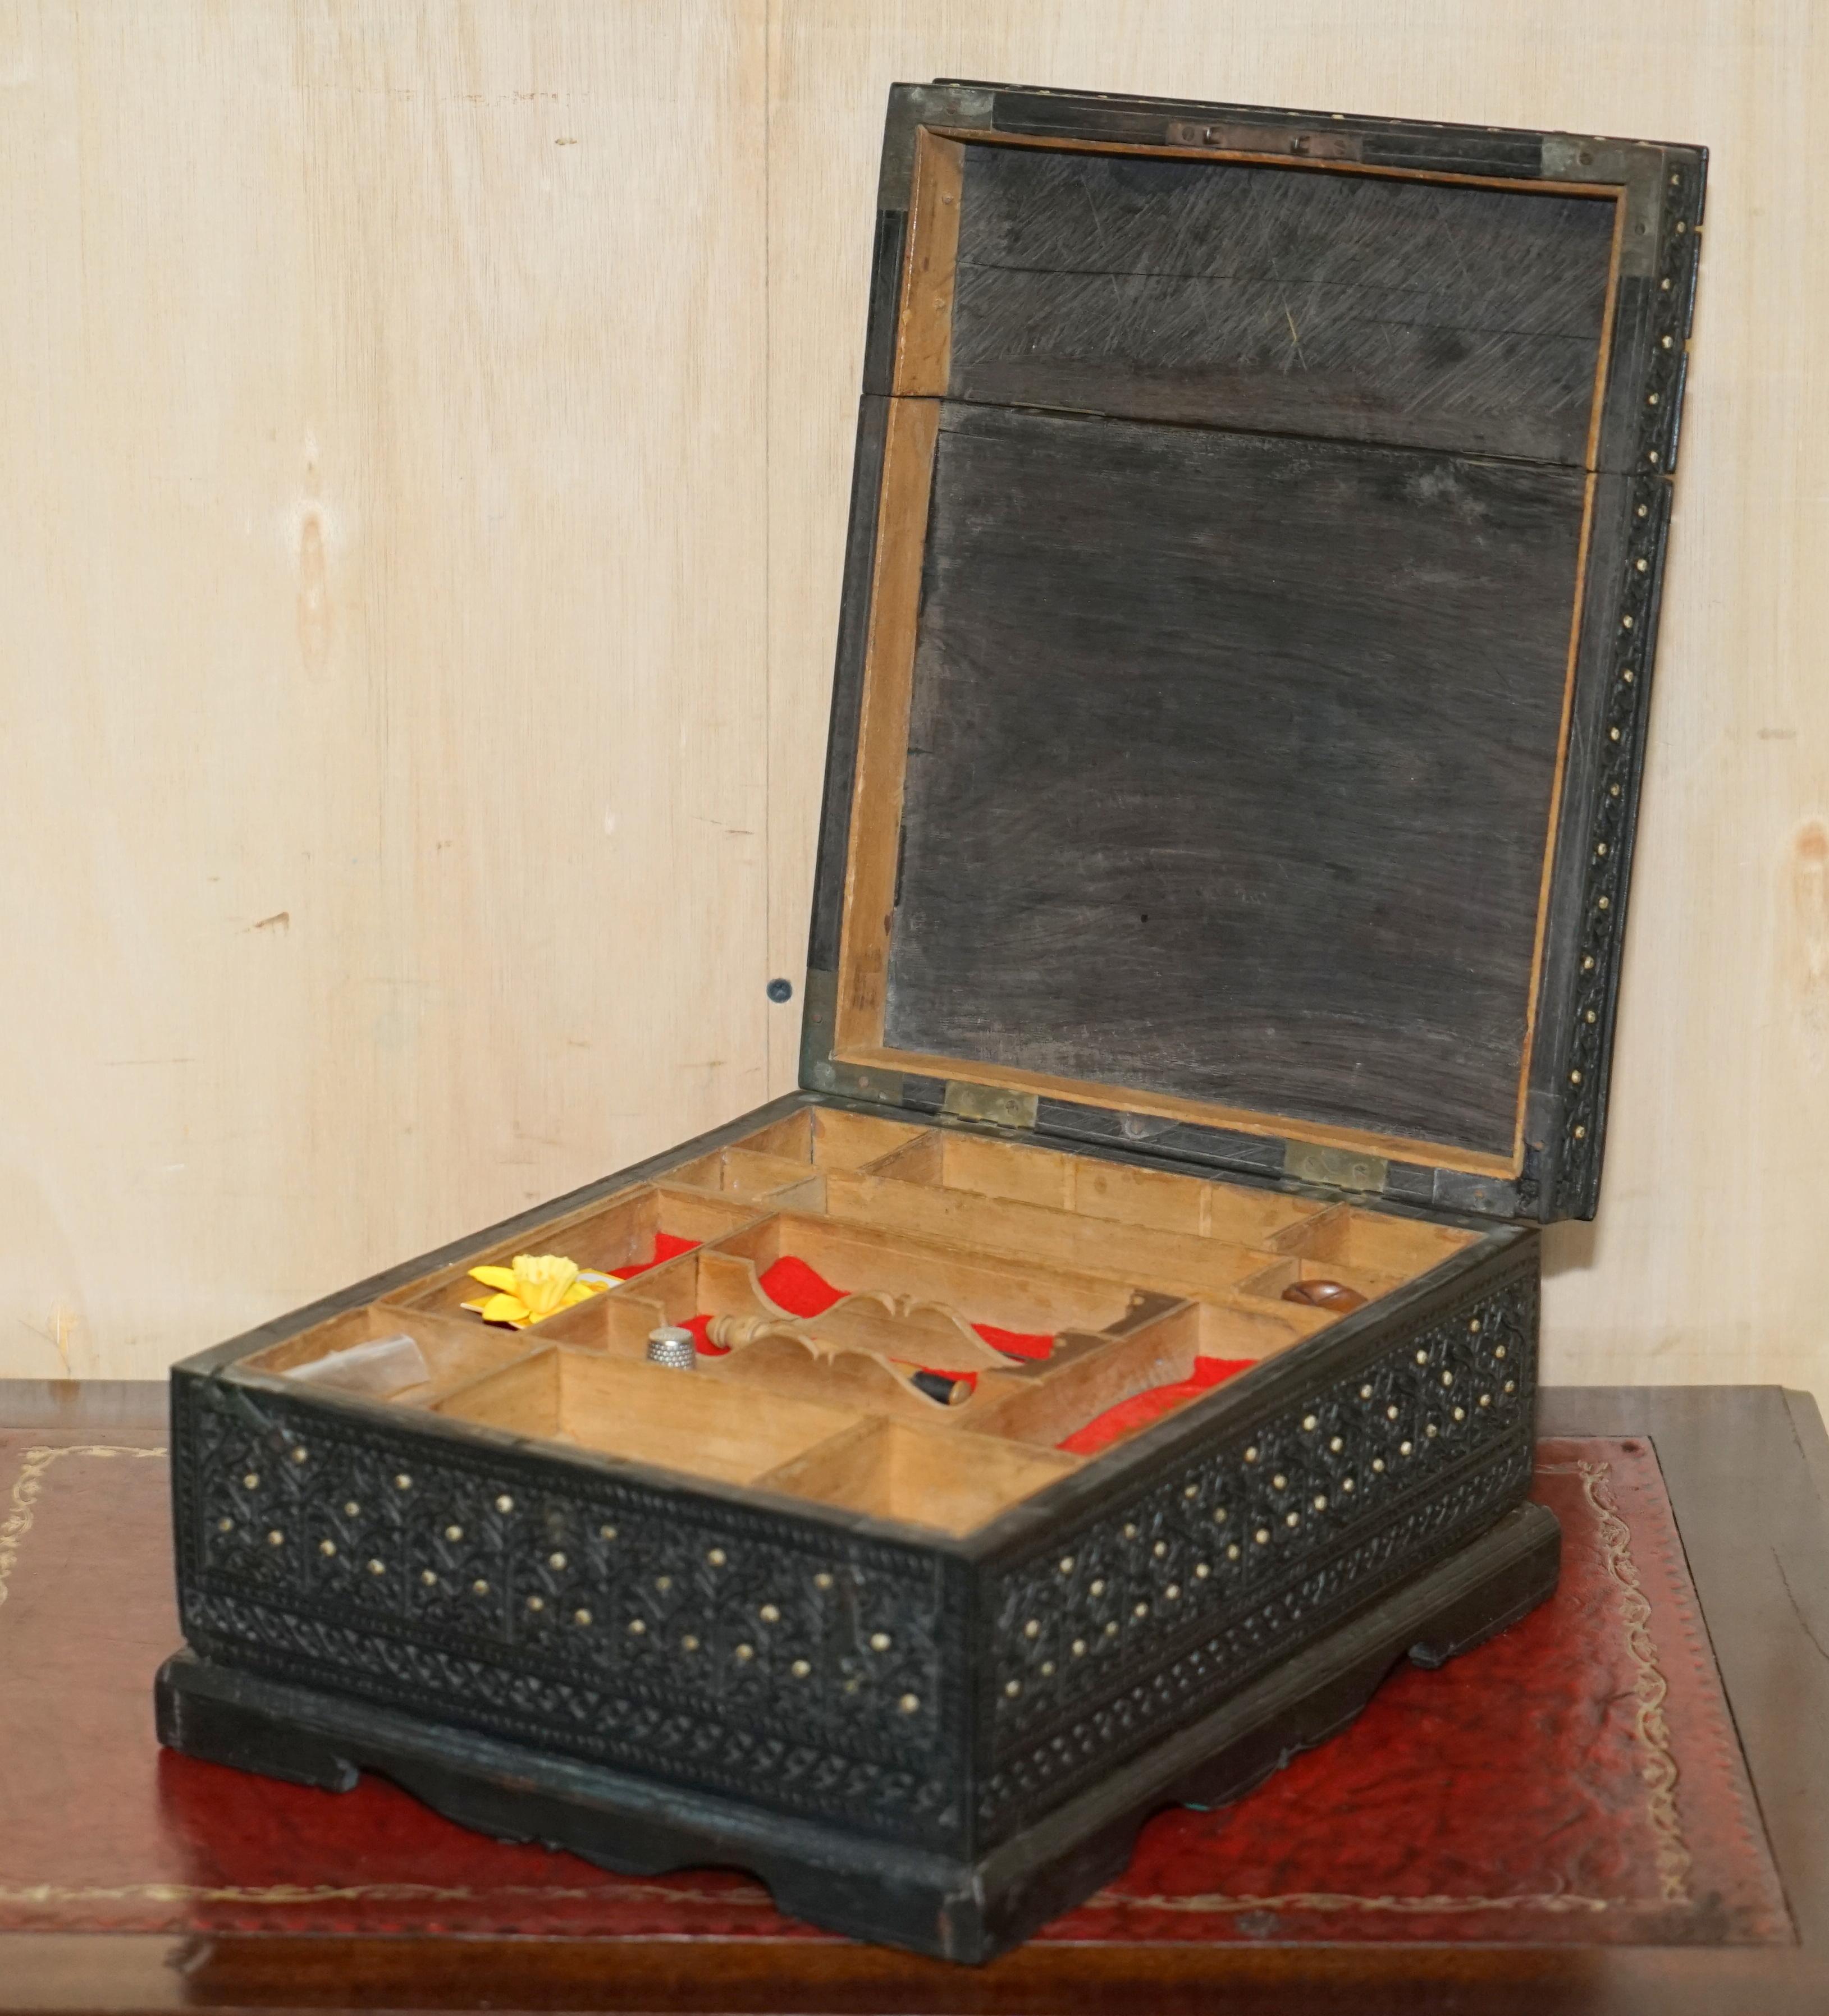 ANTIQUE CiRCA 1880 BURMESE HAND CARVED SEWING BOX WITH THE ORIGINAL CONTENTS For Sale 6